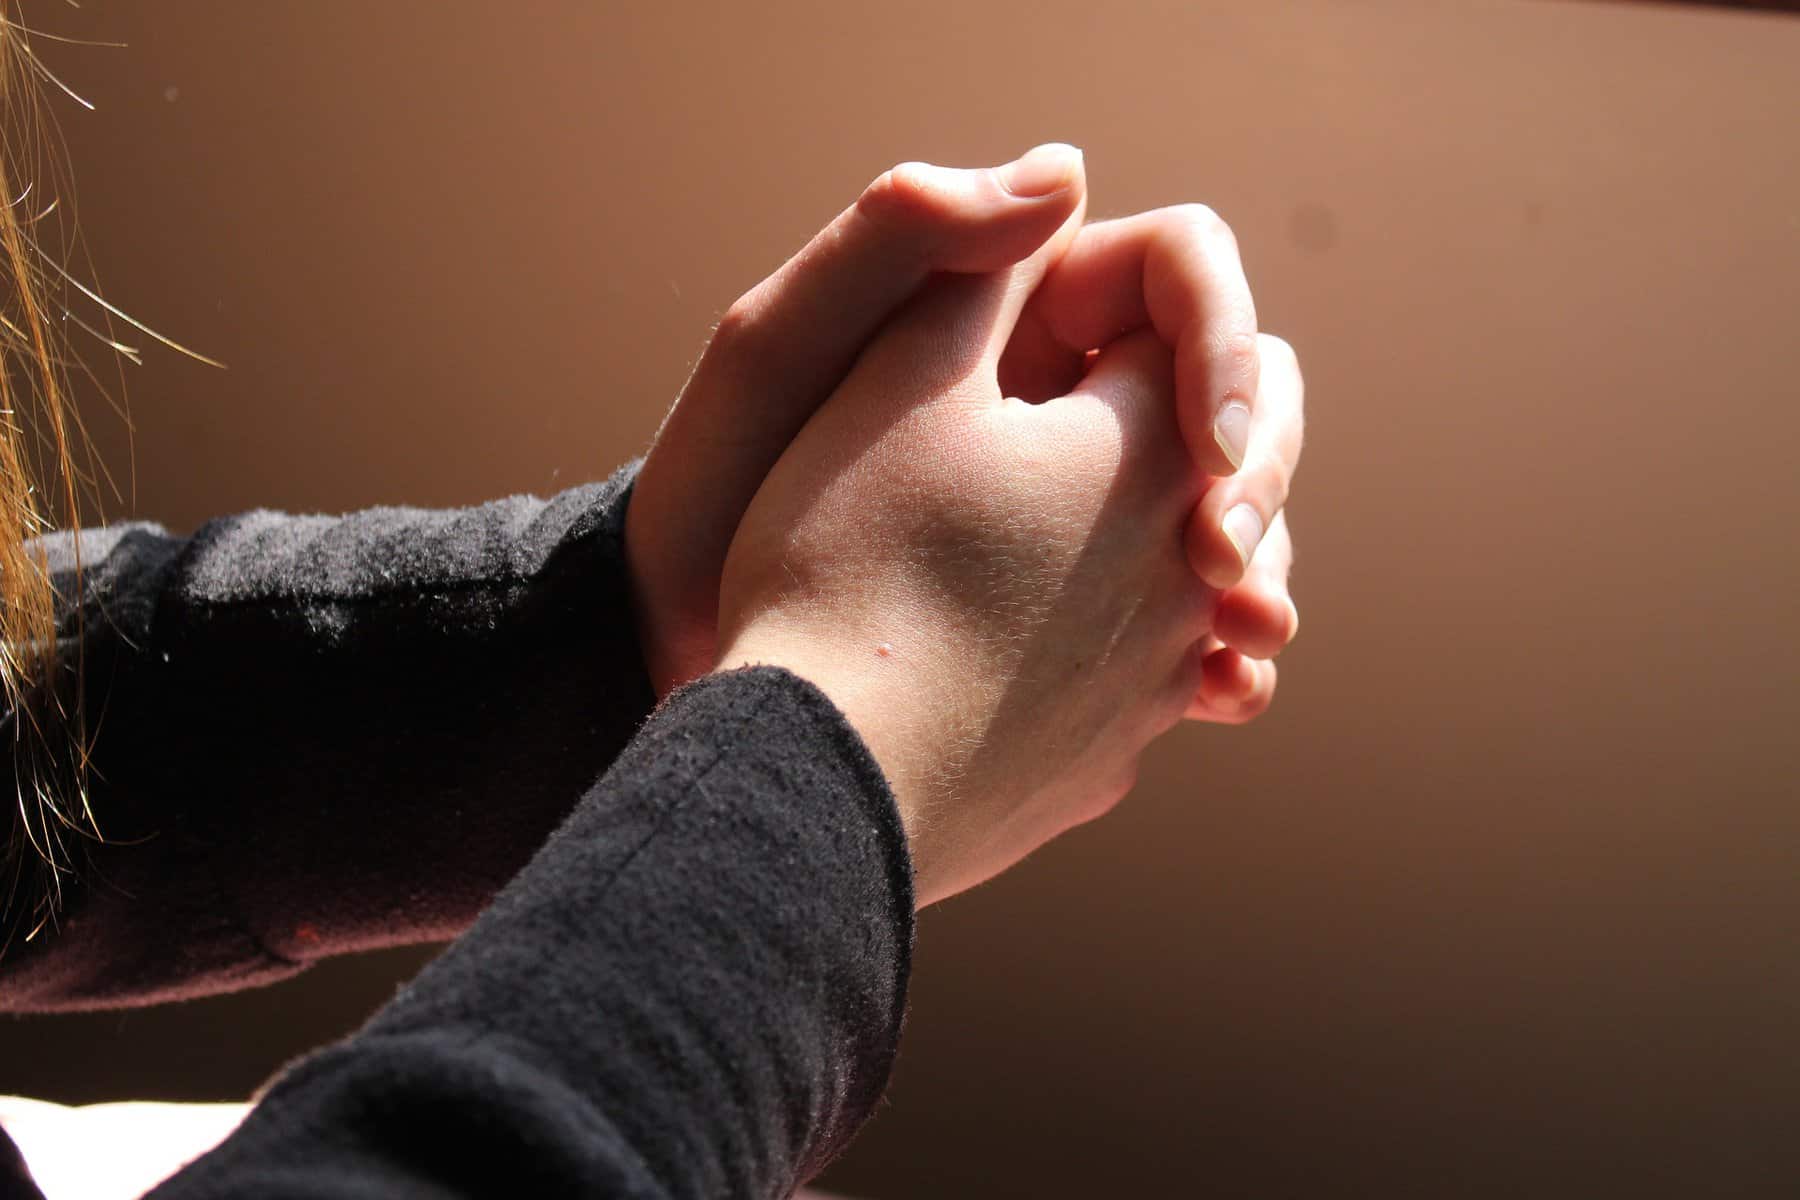 Hands are shown clasped together in front of a person in soft light.